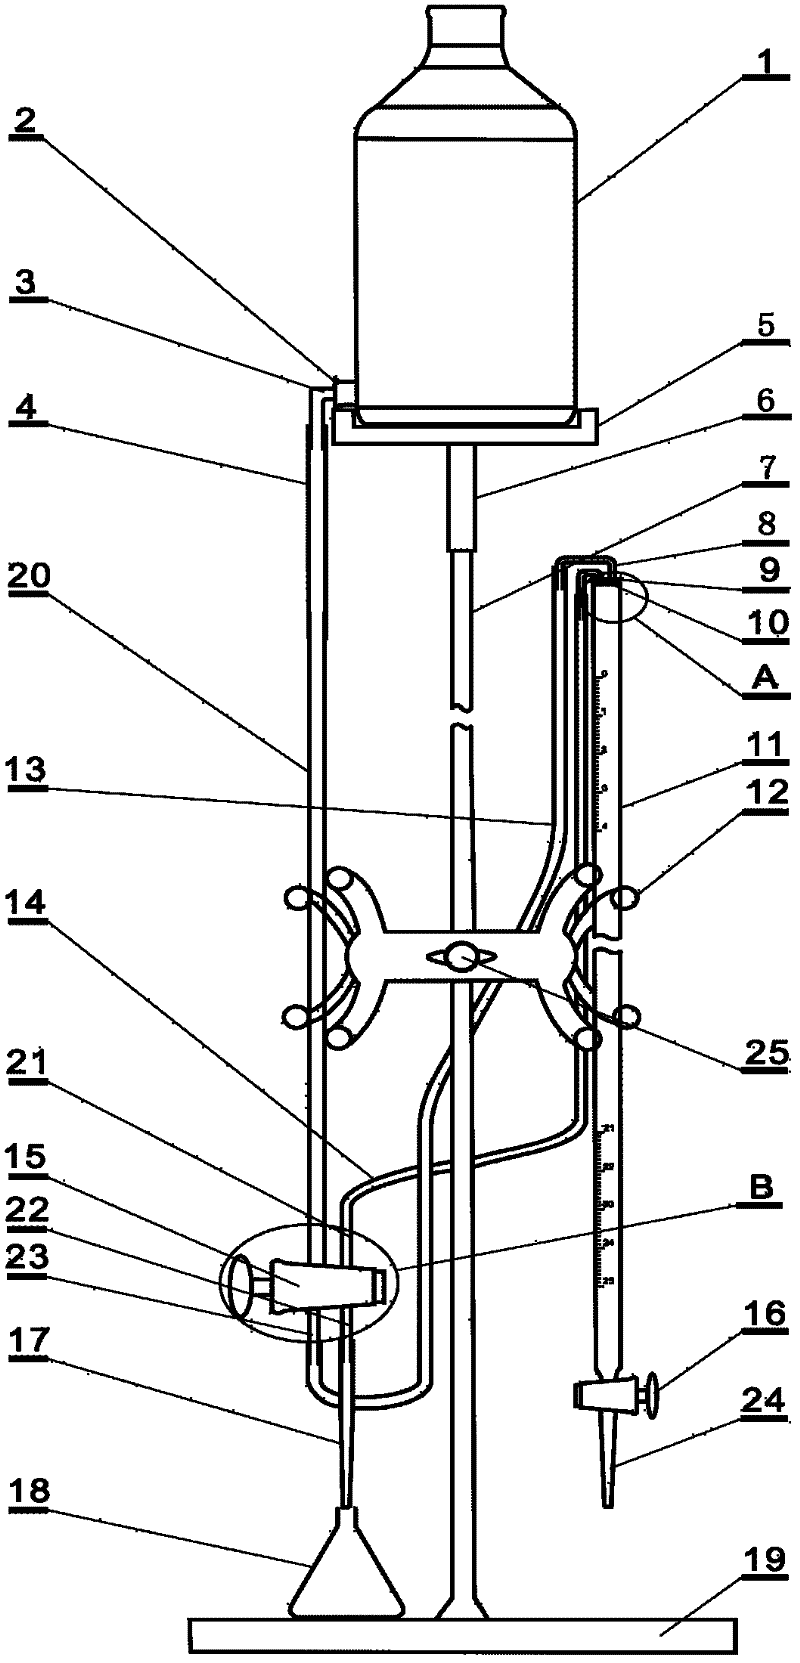 Titration device with accurate zero adjustment